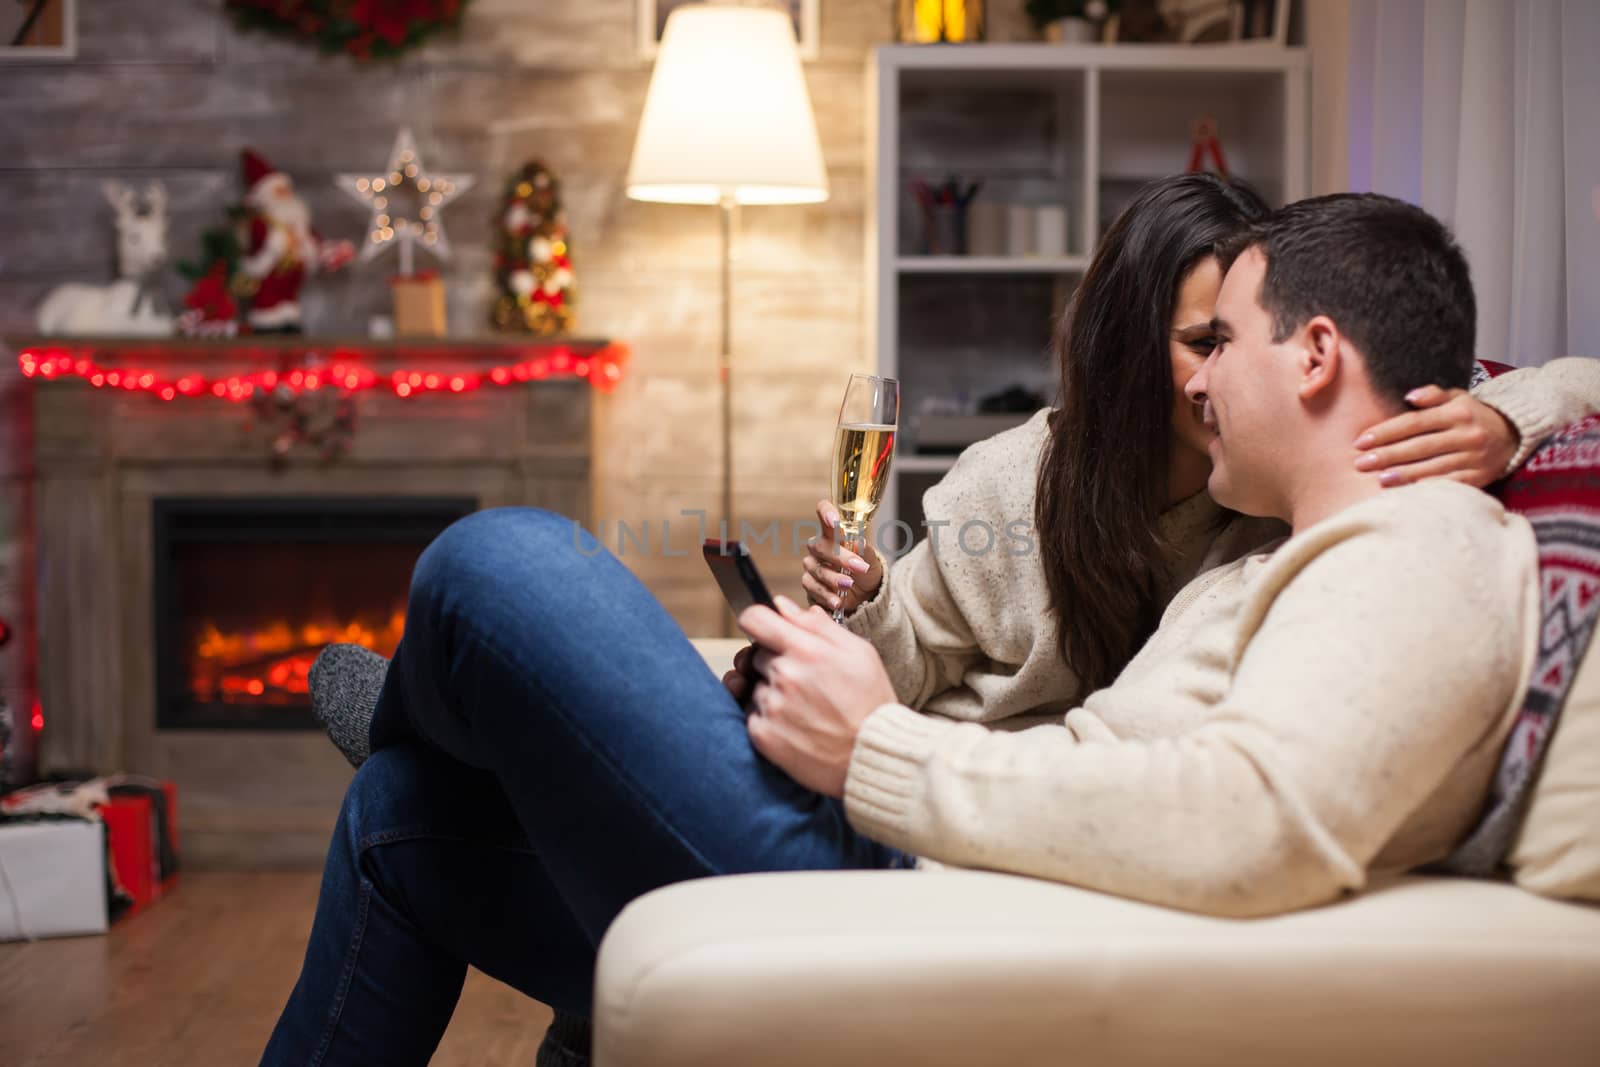 Beautiful woman holding a glass of wine and whispering something to her husband celebrating christmas.